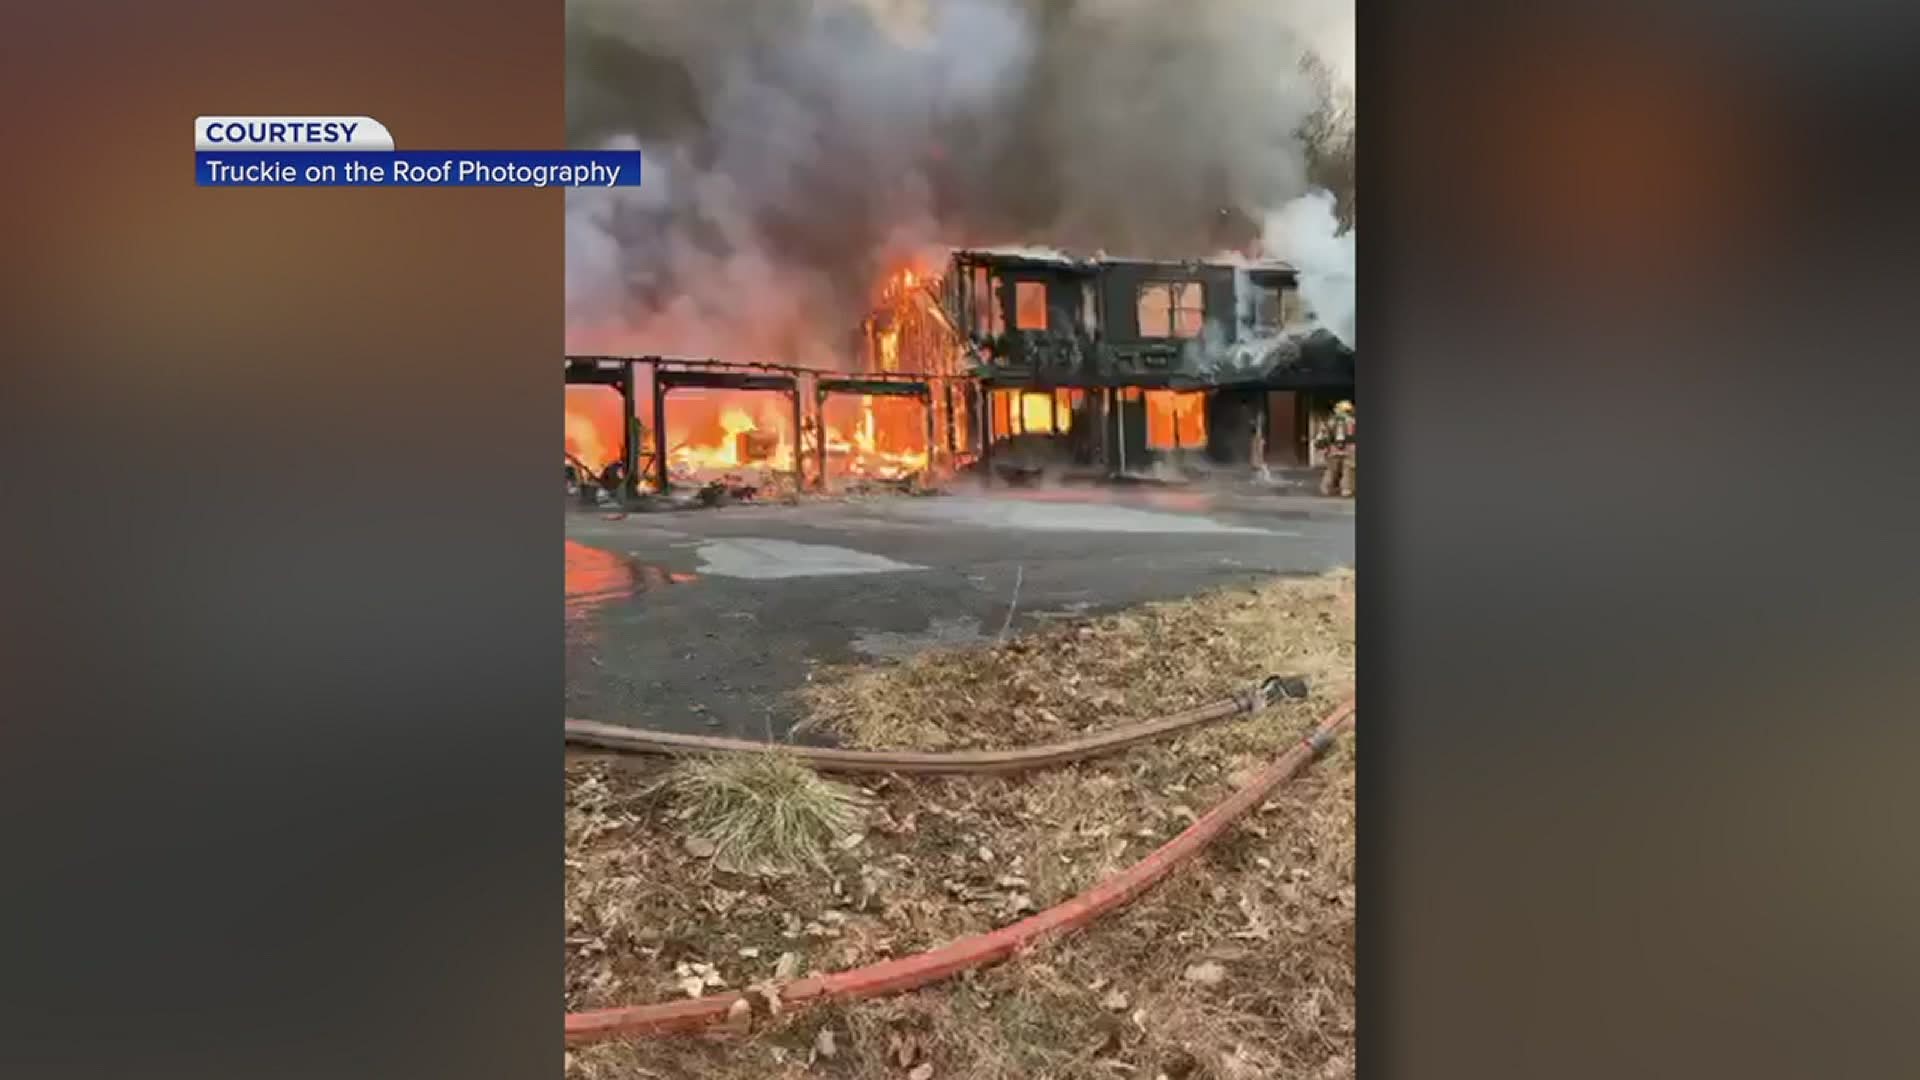 Firefighters spent Saturday afternoon battling the blaze.